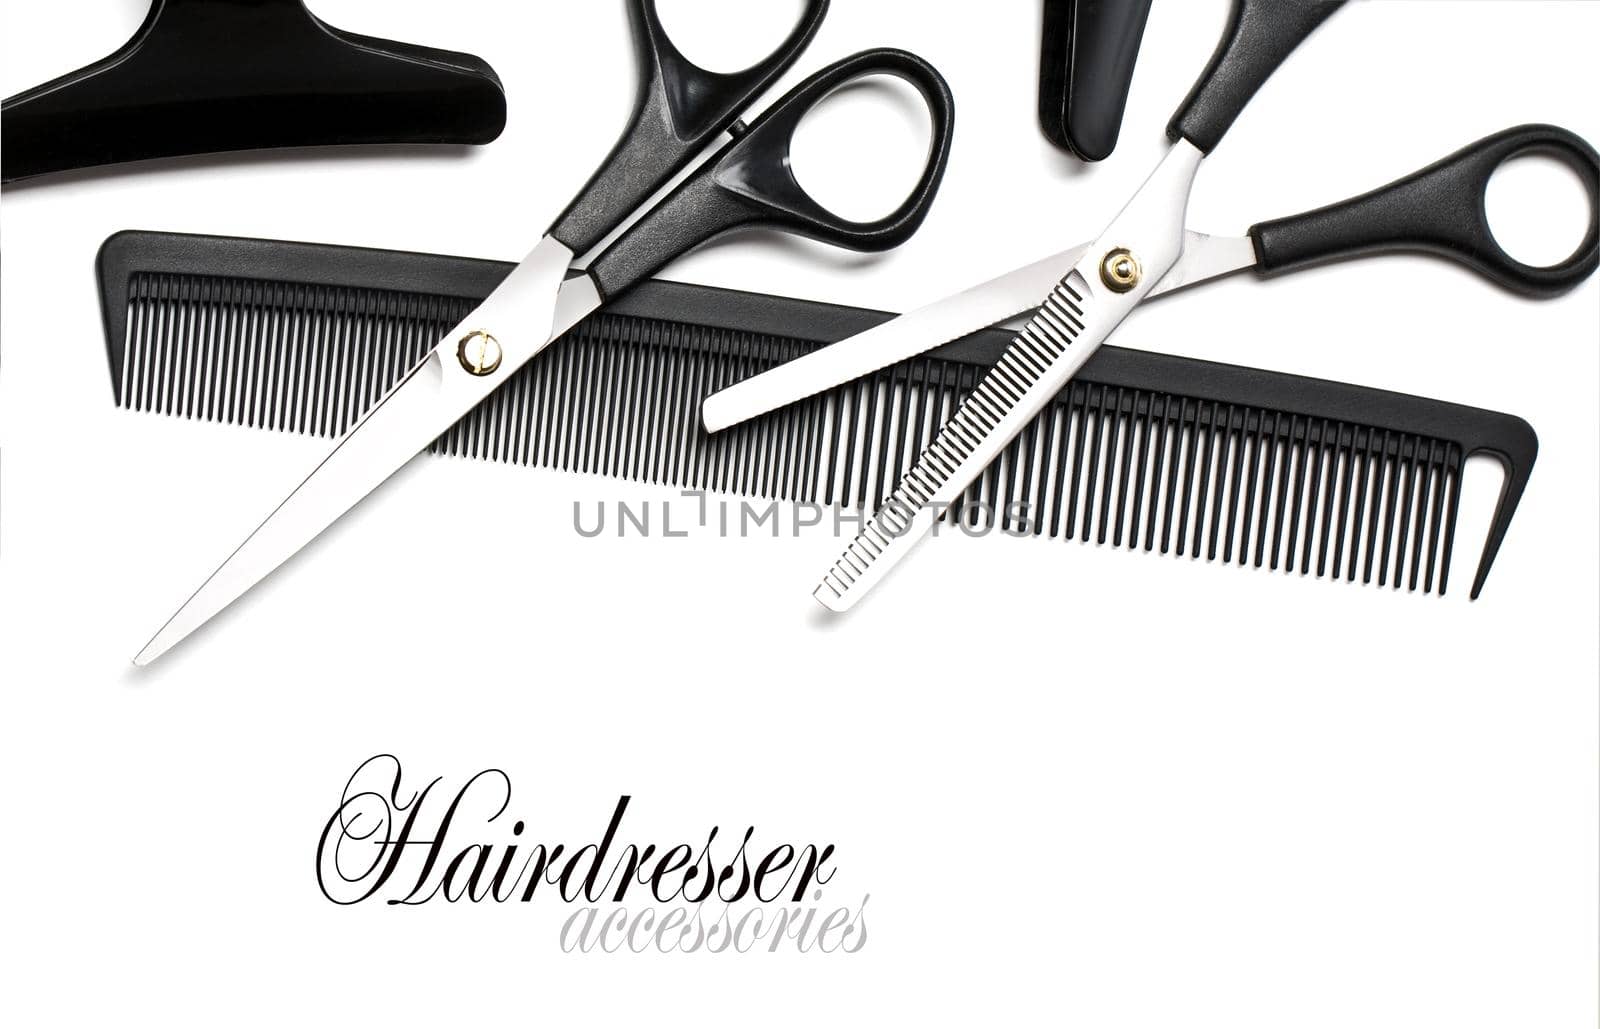 Scissors and Comb for hair isolated on white